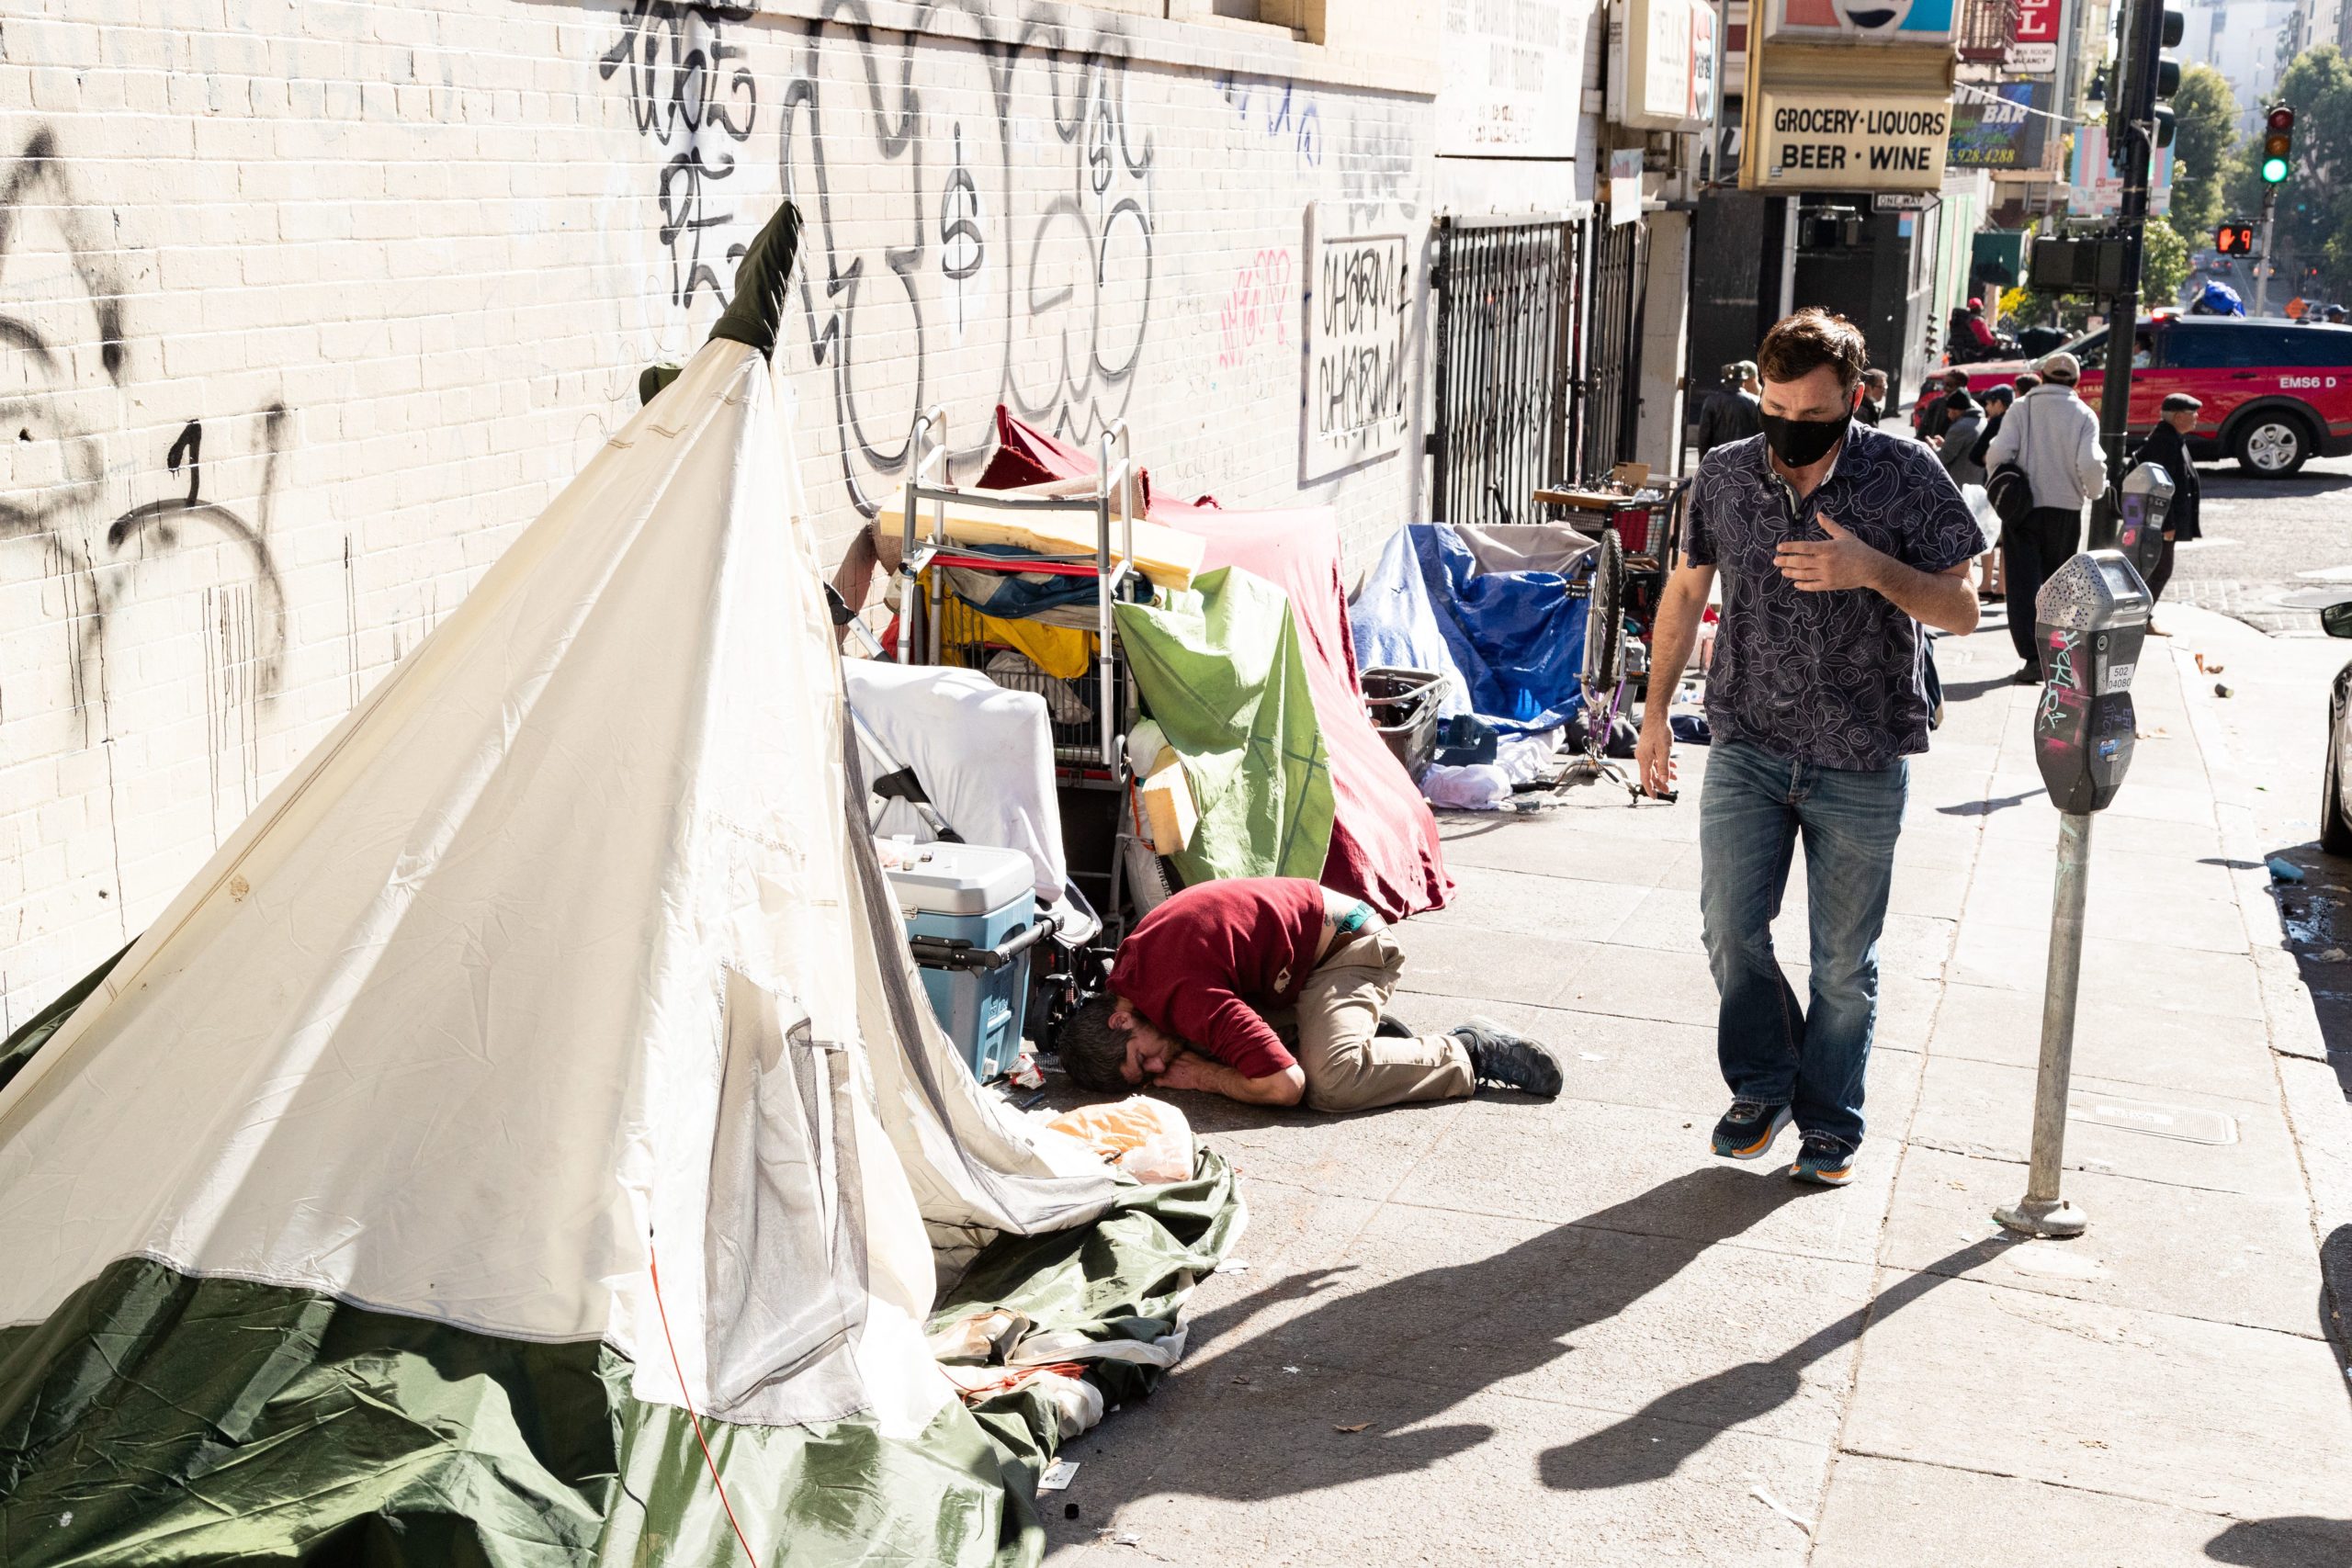 People and their belongings are seen on Jones Street in San Francisco, on November 13, 2023. San Francisco has struggled to clean up the city ahead of hosting world and business leaders. (Photo by Jason Henry / AFP) (Photo by JASON HENRY/AFP via Getty Images)